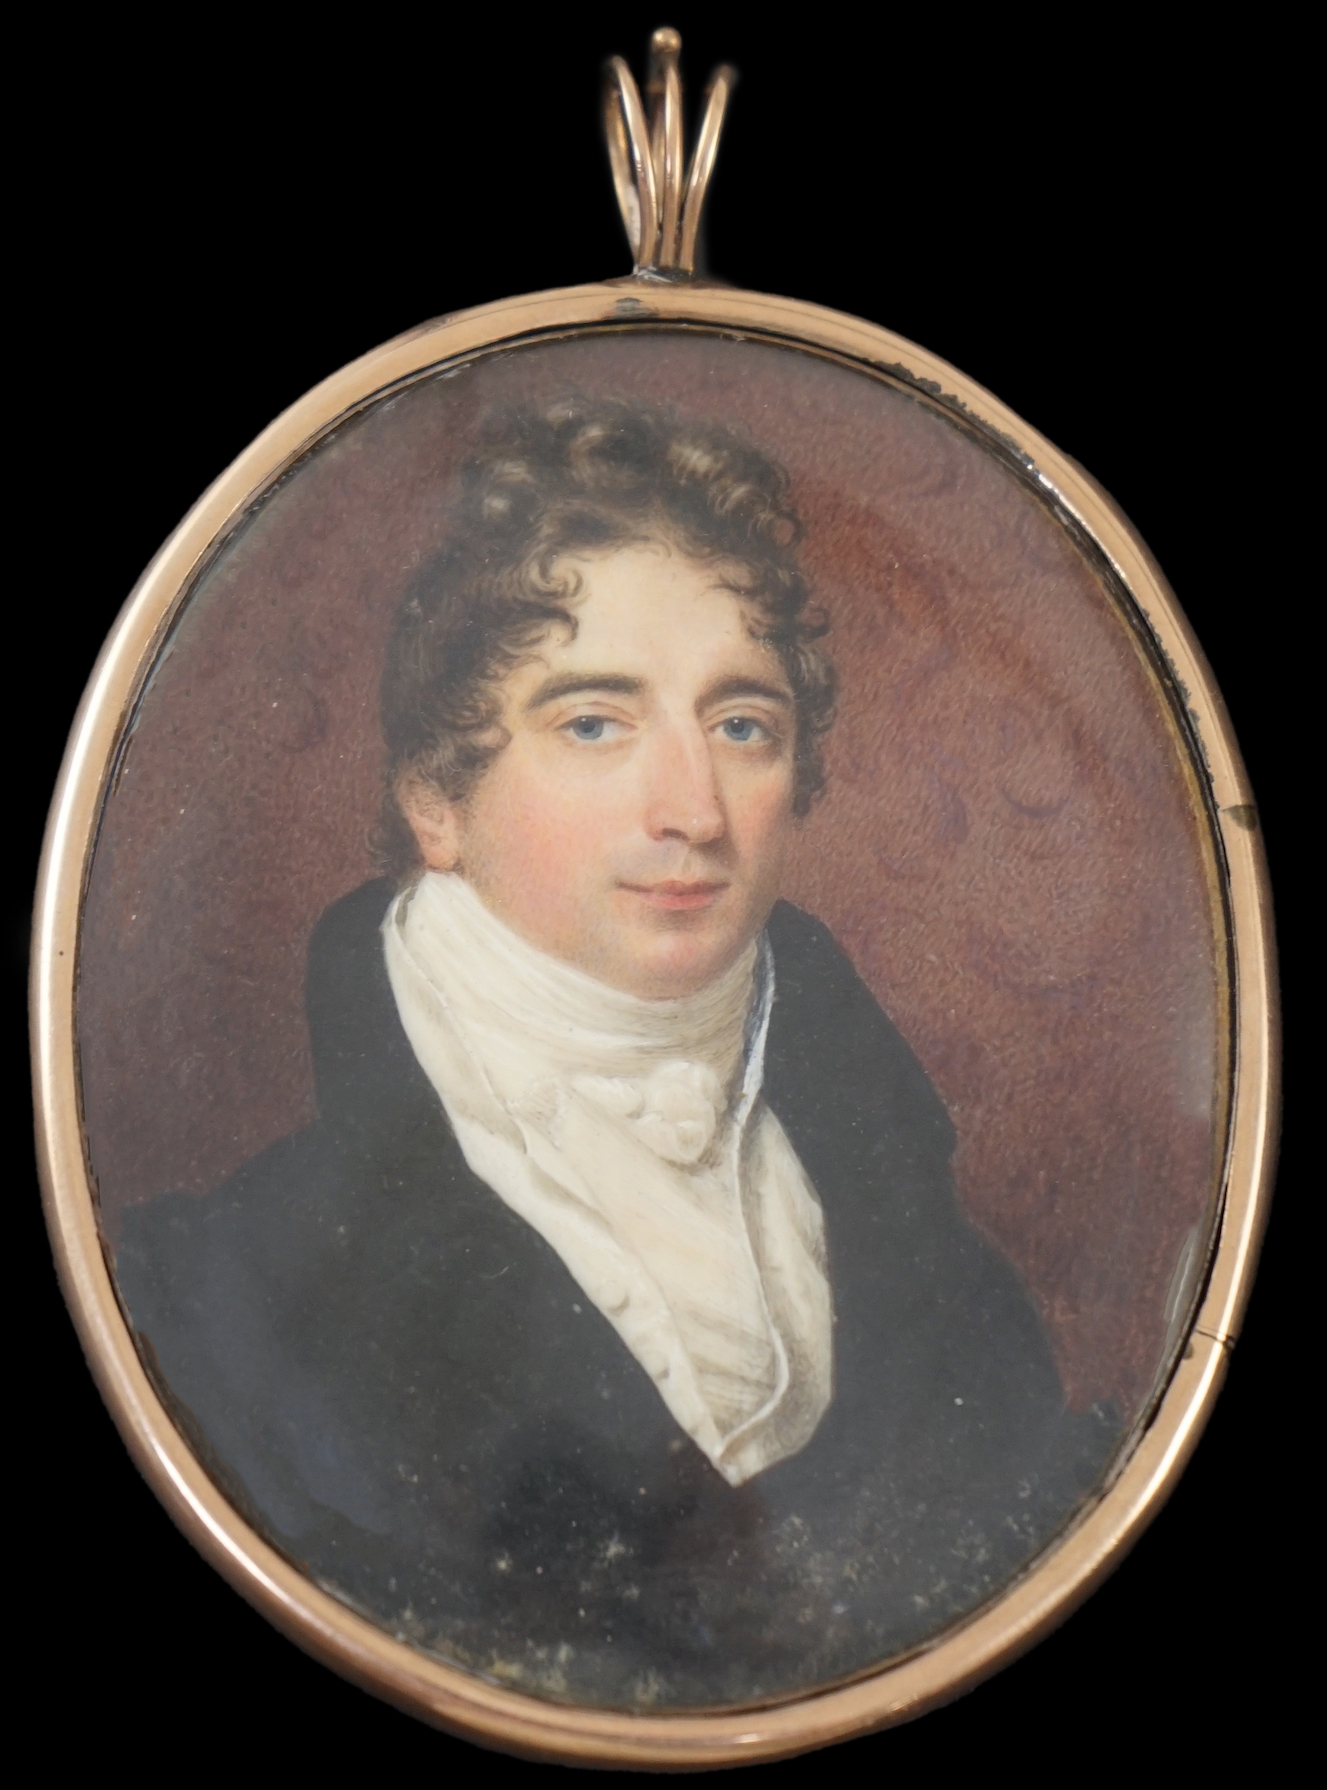 Attributed to George Stubbs (1724-1806), Portrait miniature of a gentleman, watercolour on ivory, 7.4 x 5.7cm. CITES Submission reference YZZ8A4YX